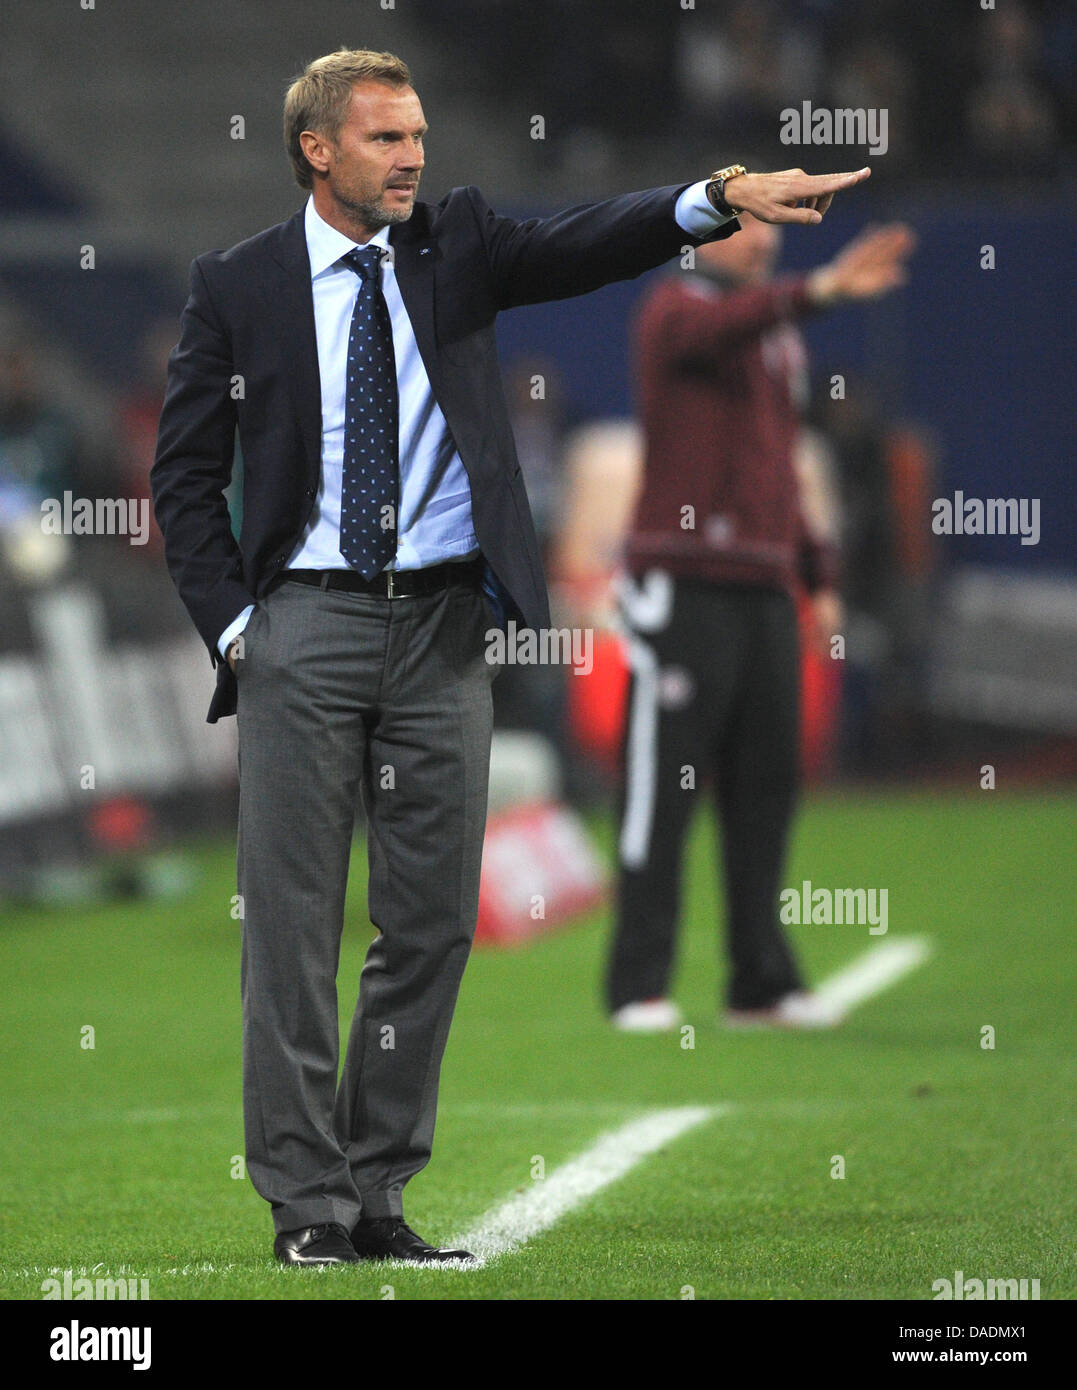 Hamburg's head coach Thorsten Fink (L) and Kaiserslautern's coach Marco Kurz stand on the sideline during the Bundesliga soccer match Hamburger SV vs 1. FC Kaiserslautern at Imtech Arena in Hamburg, Germany, 30 October 2011. Photo: Marcus Brandt    (ATTENTION: EMBARGO CONDITIONS! The DFL permits the further utilisation of the pictures in IPTV, mobile services and other new technolo Stock Photo